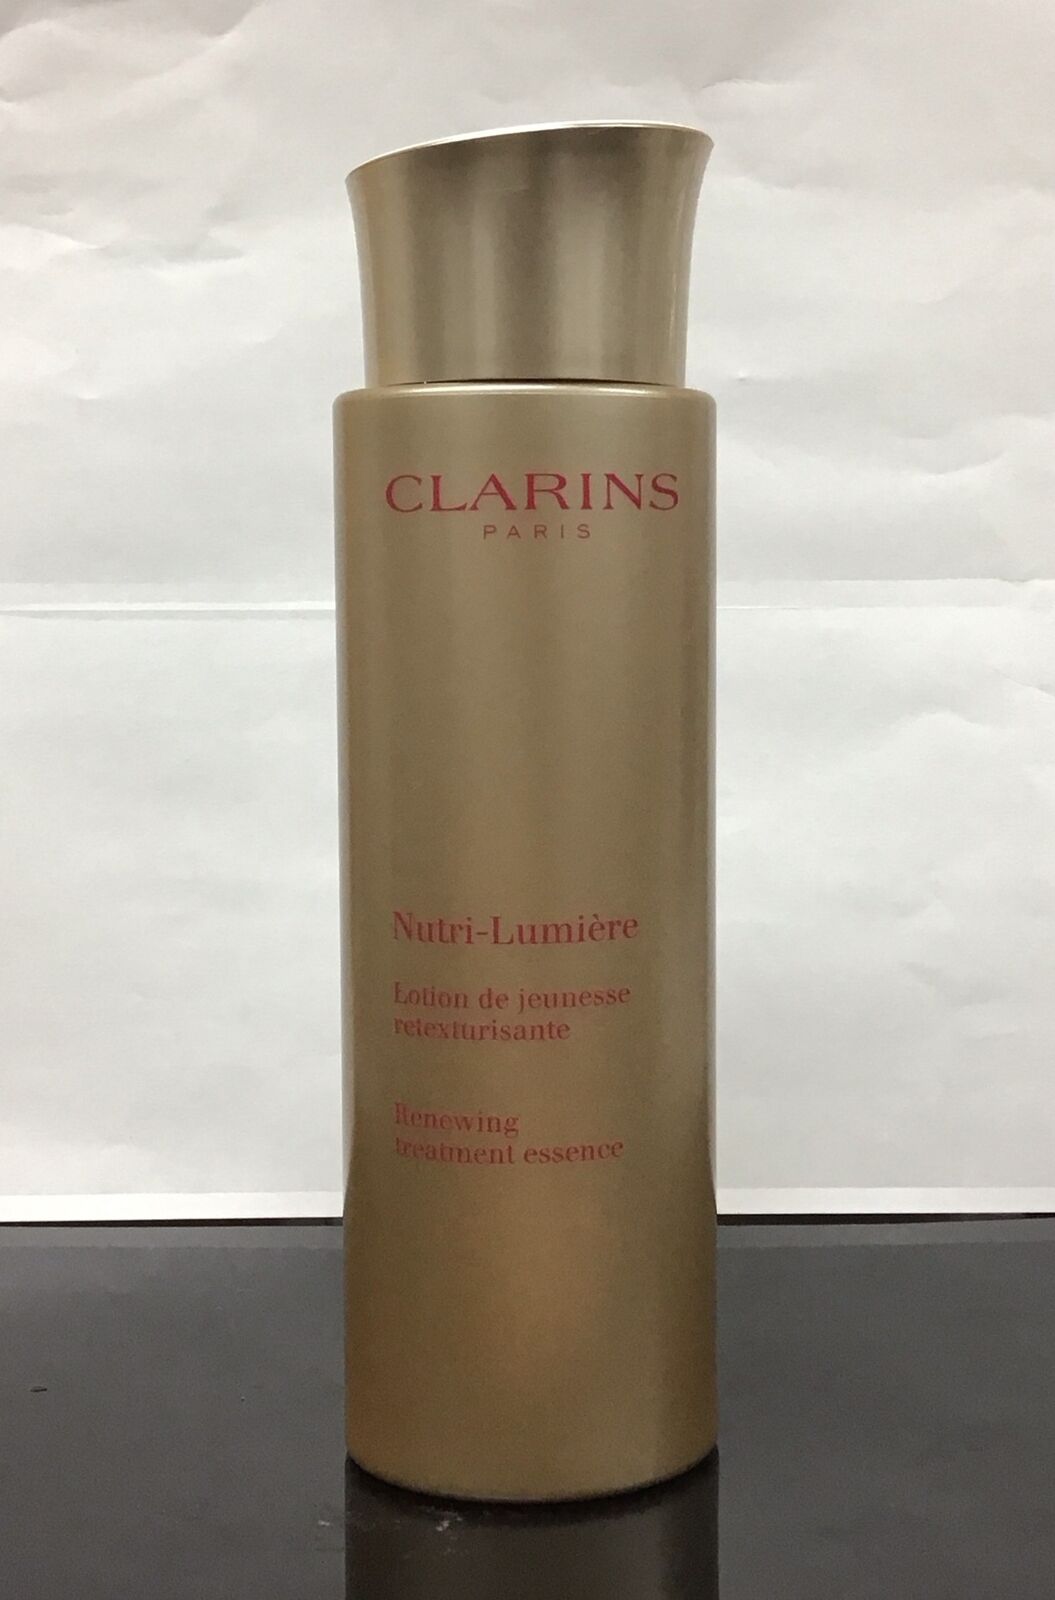 Clarins Nutrition- Lumiere Renewing Treatment Essence 6.7 Fl Oz, As Pictured